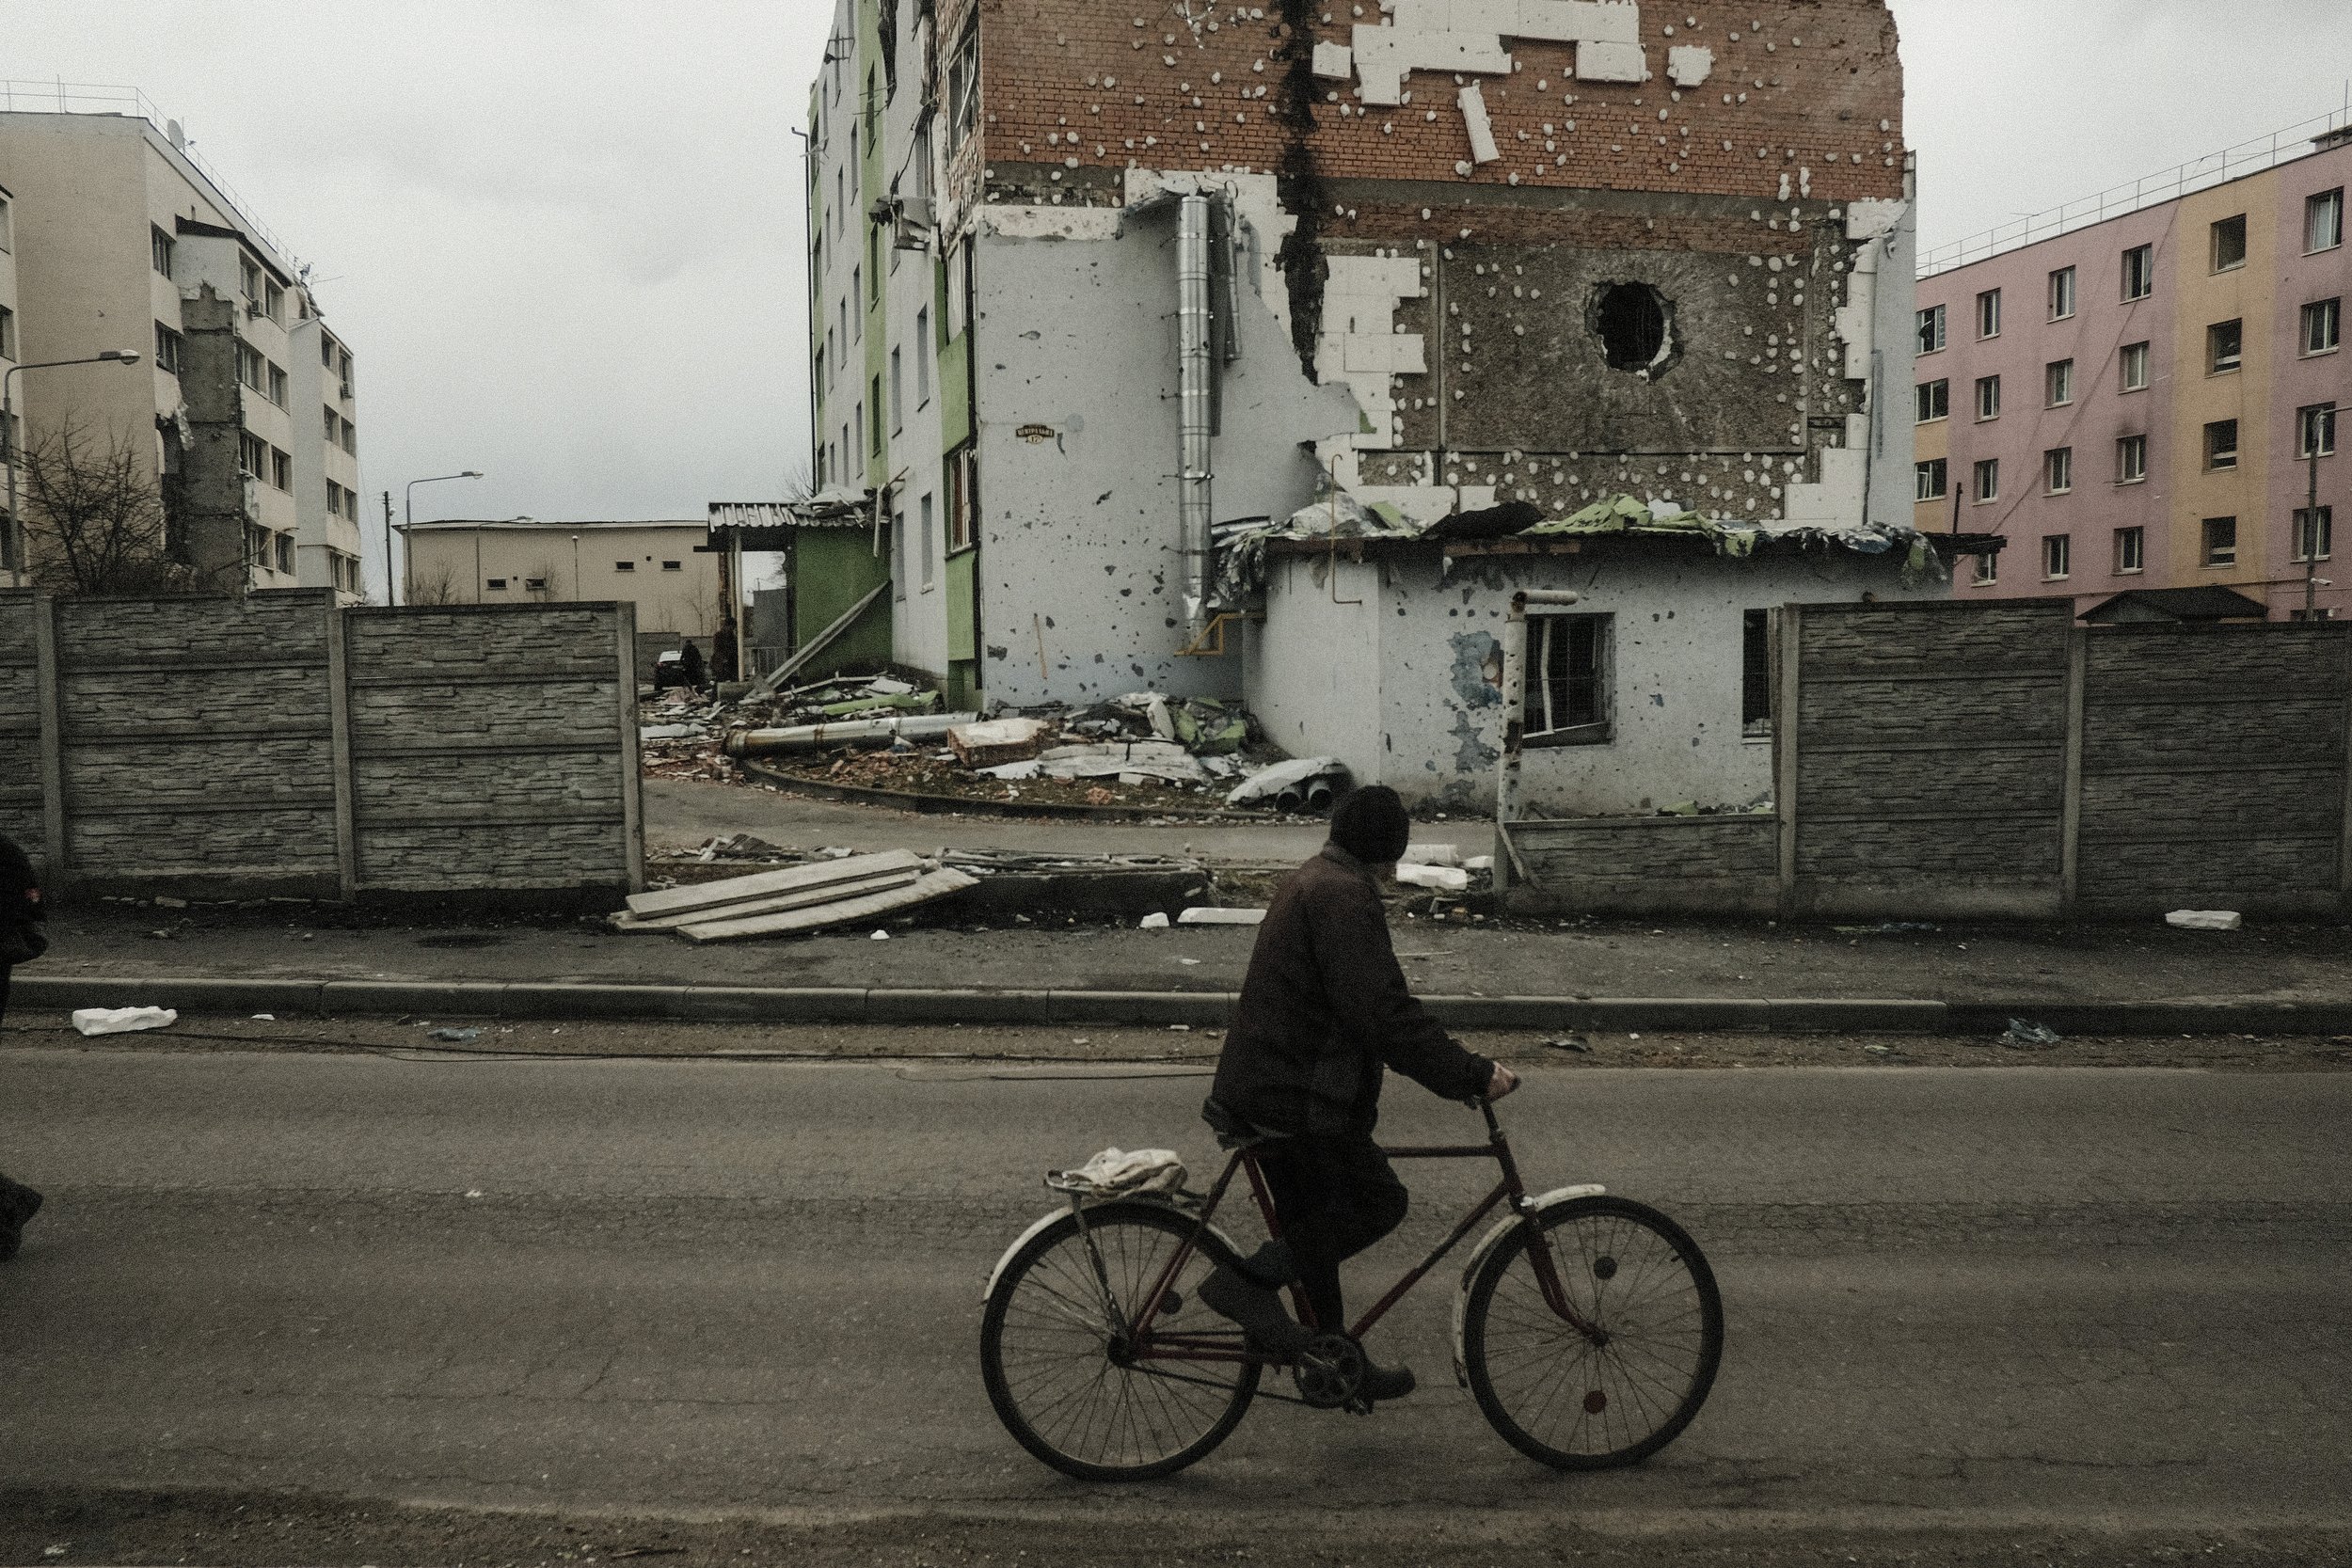  A man rides his bike past a destroyed apartment block in a town on the outskirts of Kyiv, Ukraine on April 7, 2022. The villages and towns on the outskirts of Kyiv saw fierce fighting and major destruction during the battle of Kyiv as Russian forces